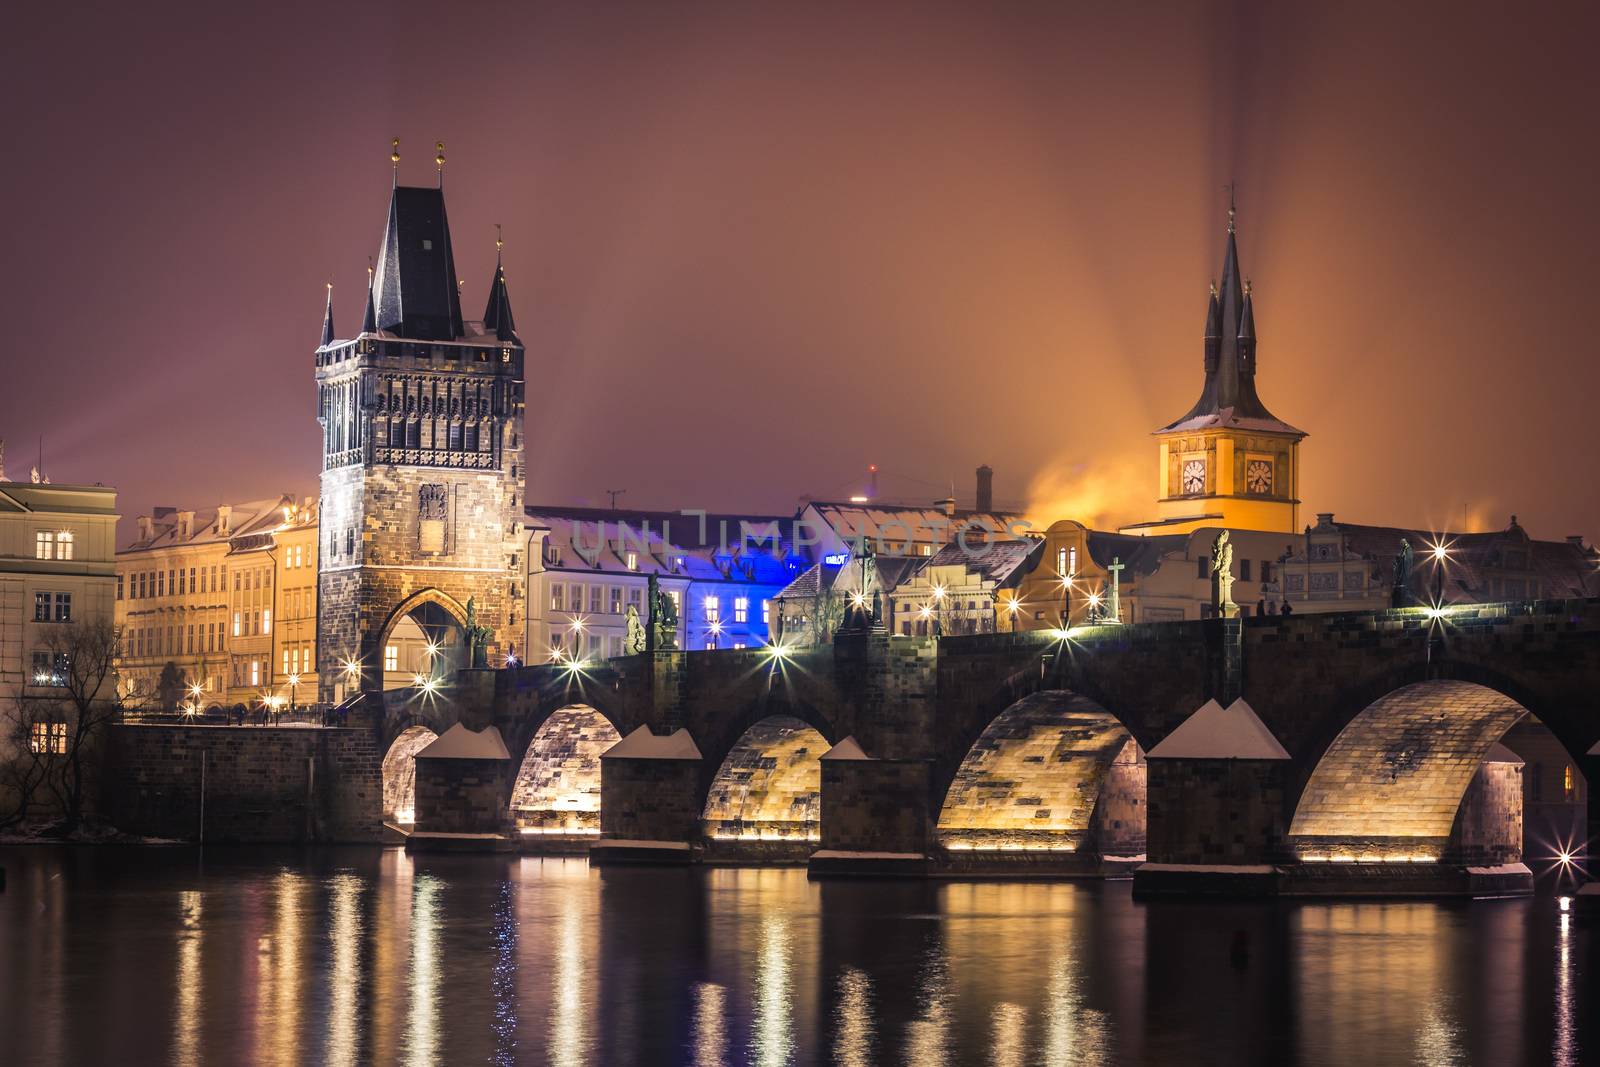 Prague at night, Charles Bridge and its tower from across the river. by petrsvoboda91